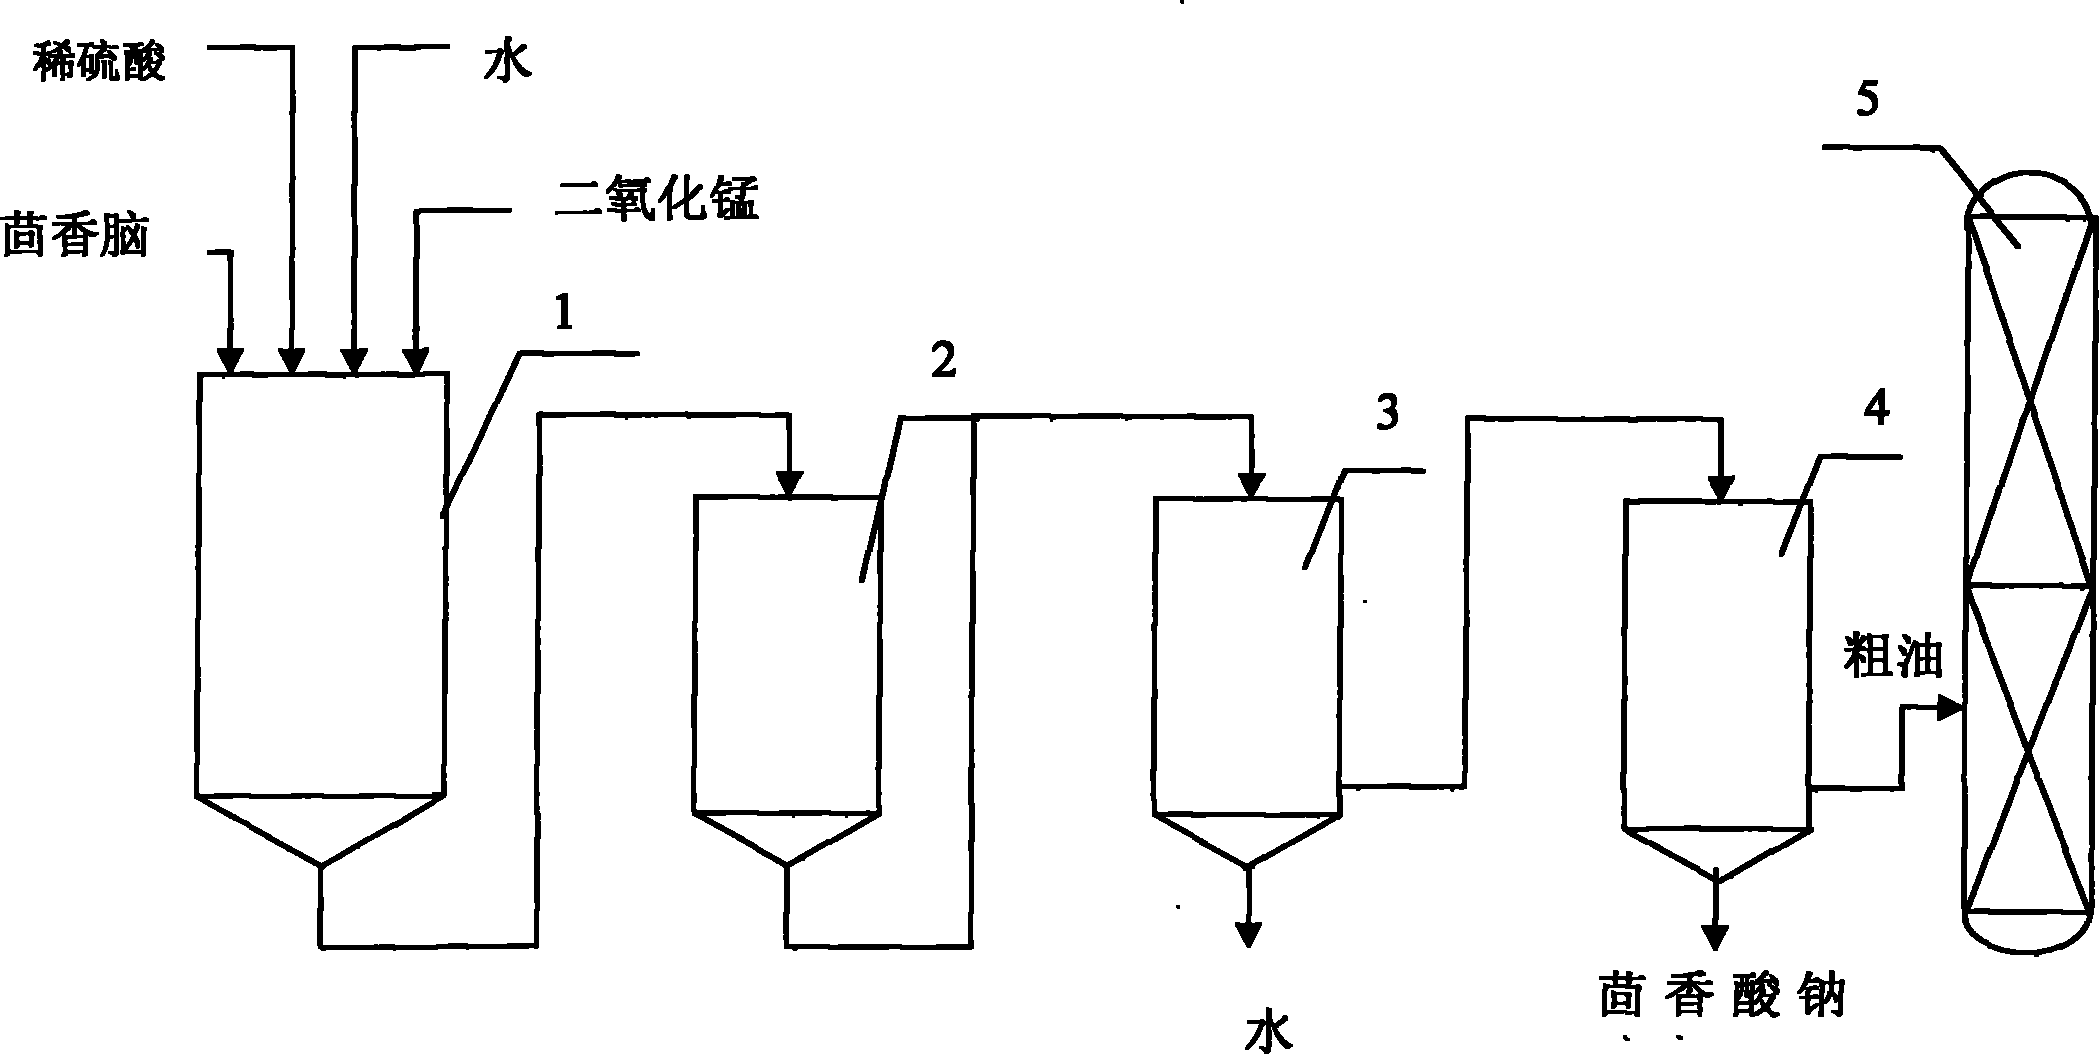 Production method of natural equivalent anisic aldehyde